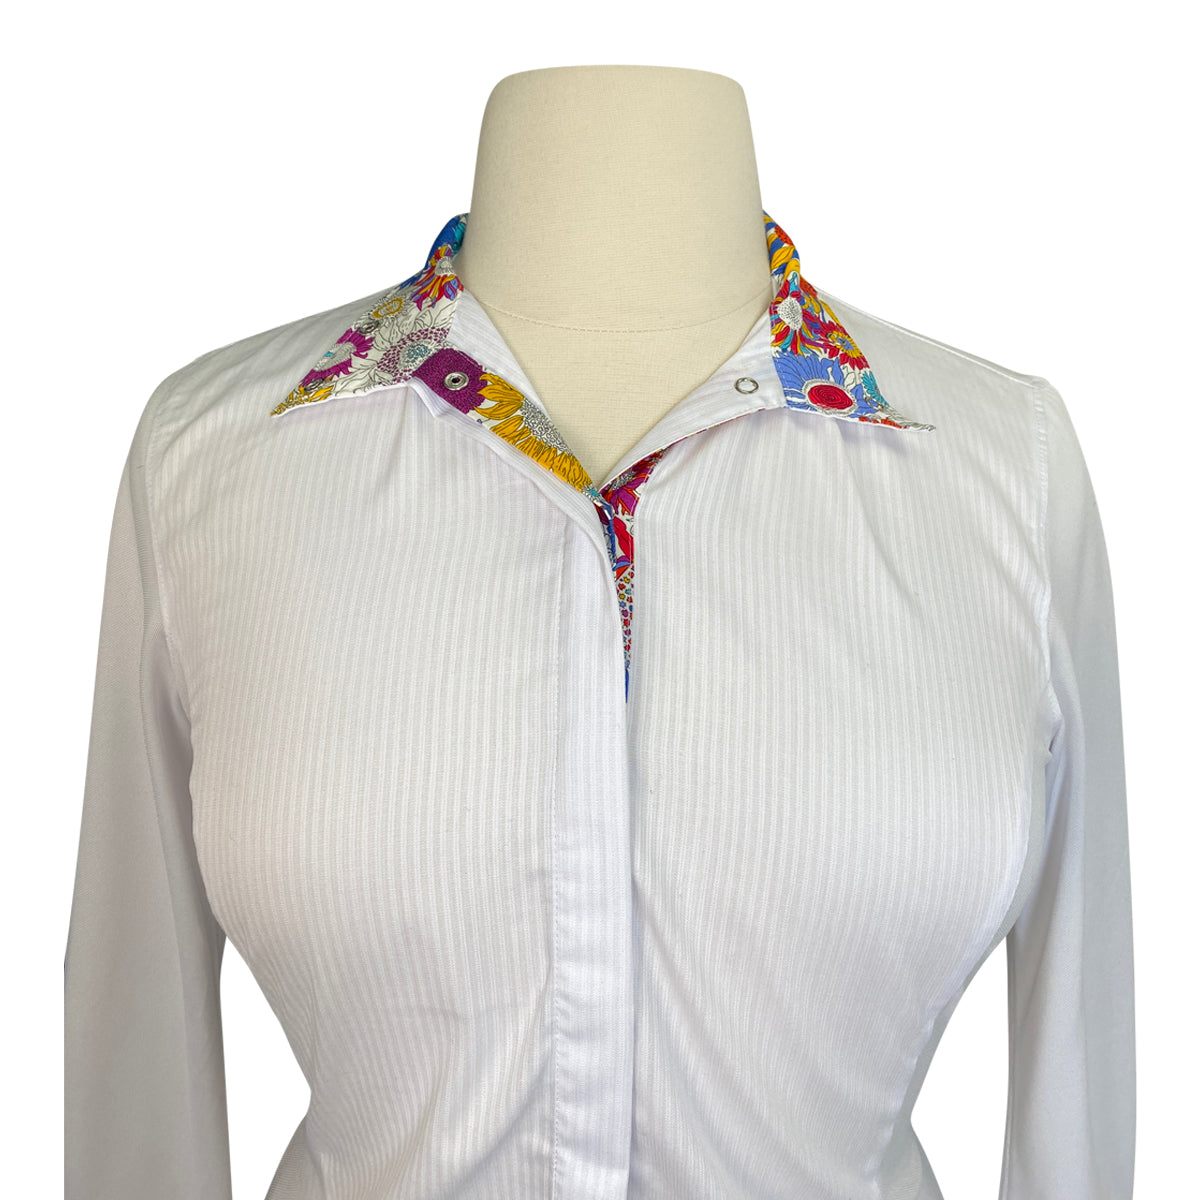 Ariat Pro Series Show Shirt in White